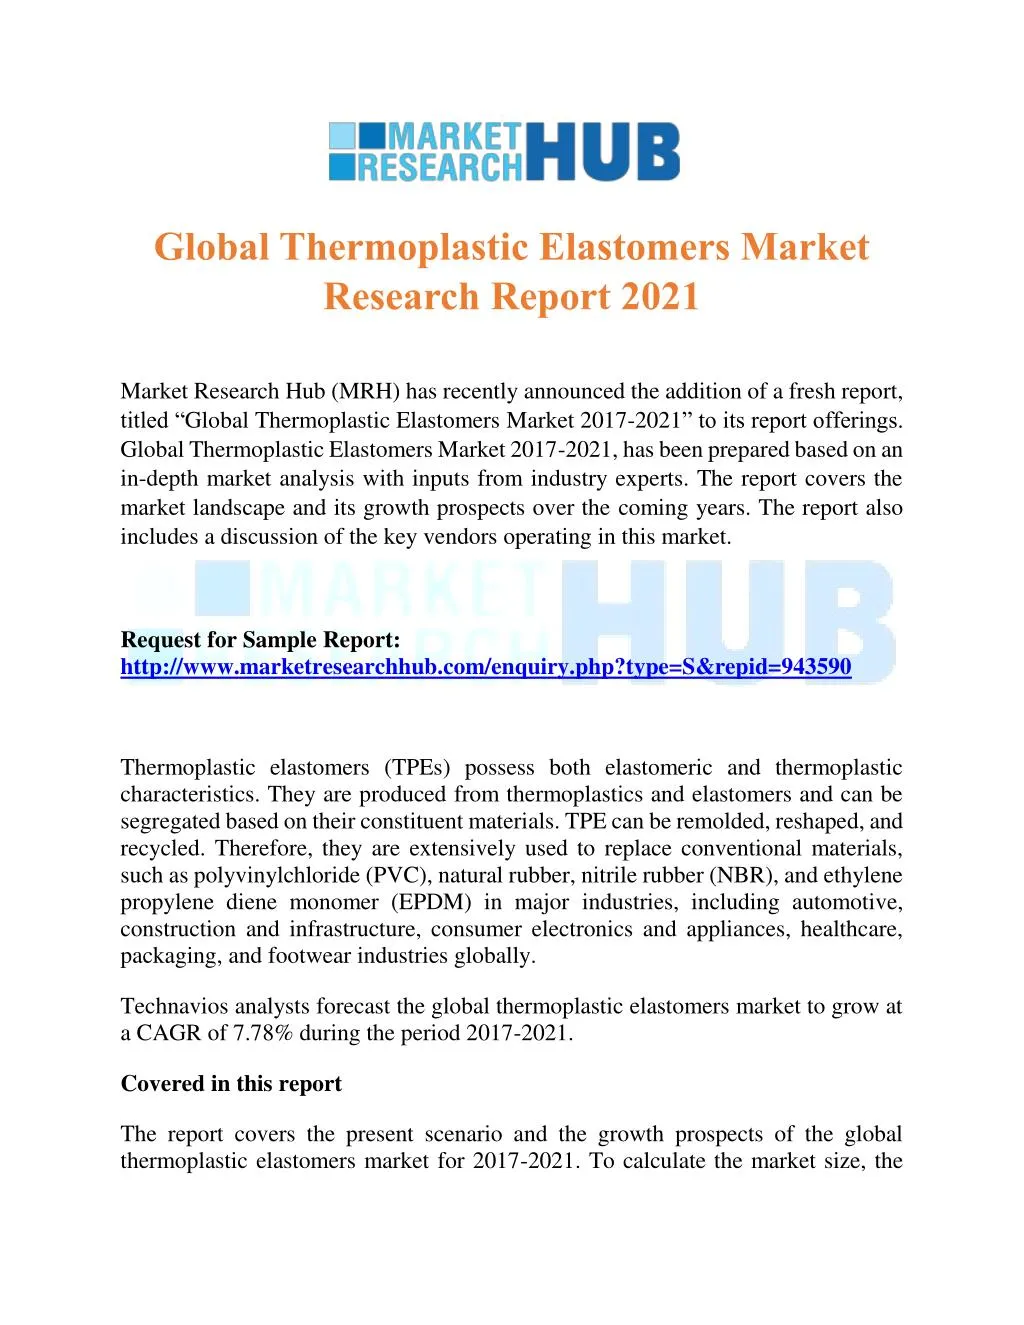 global thermoplastic elastomers market research